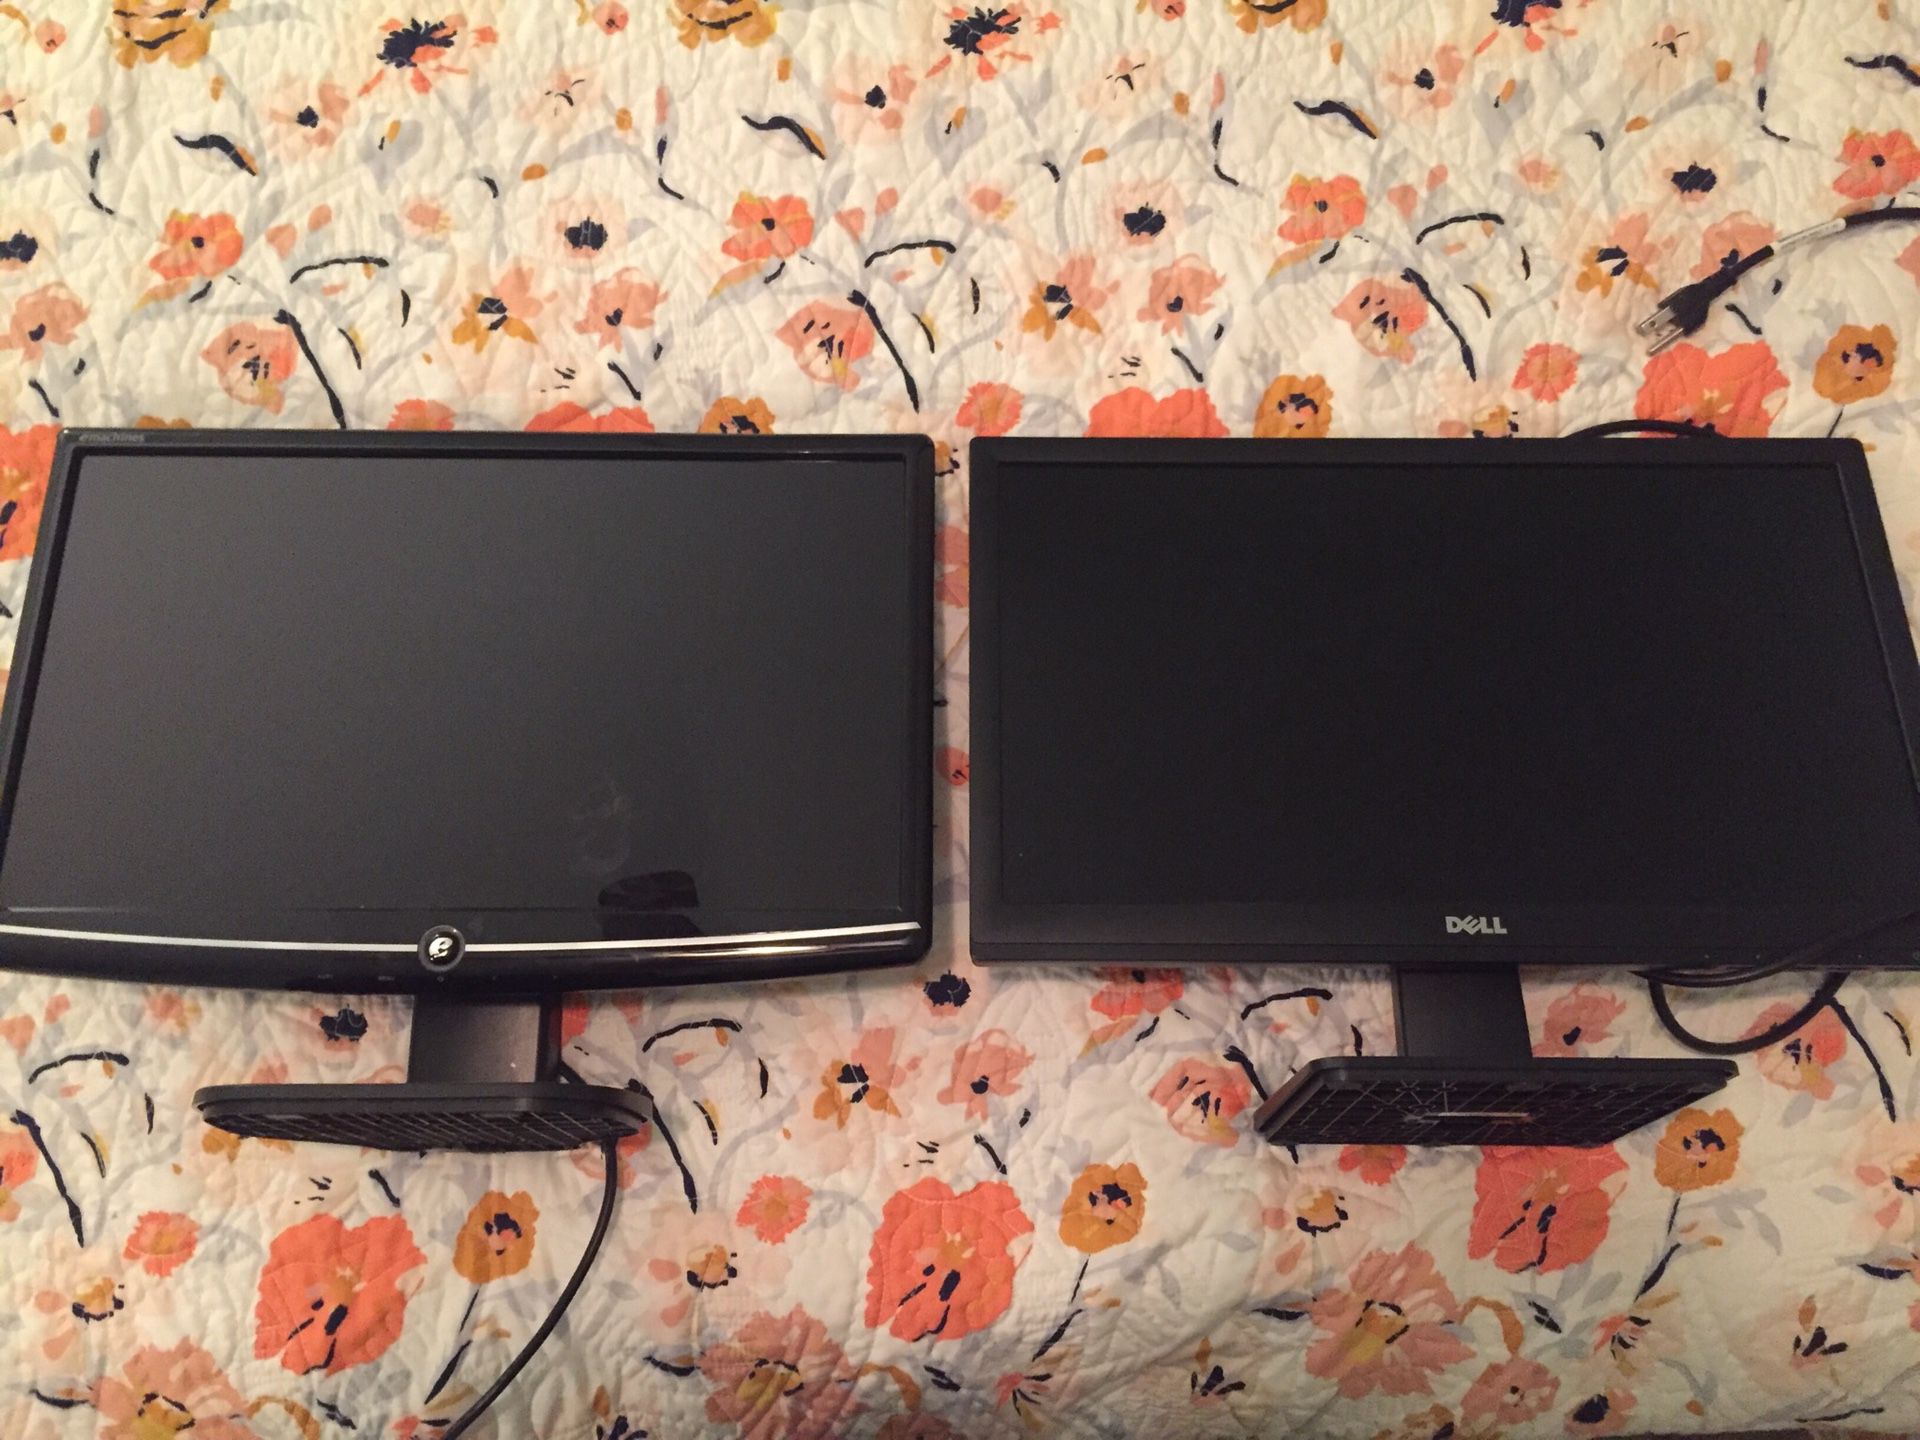 Two working computer monitors